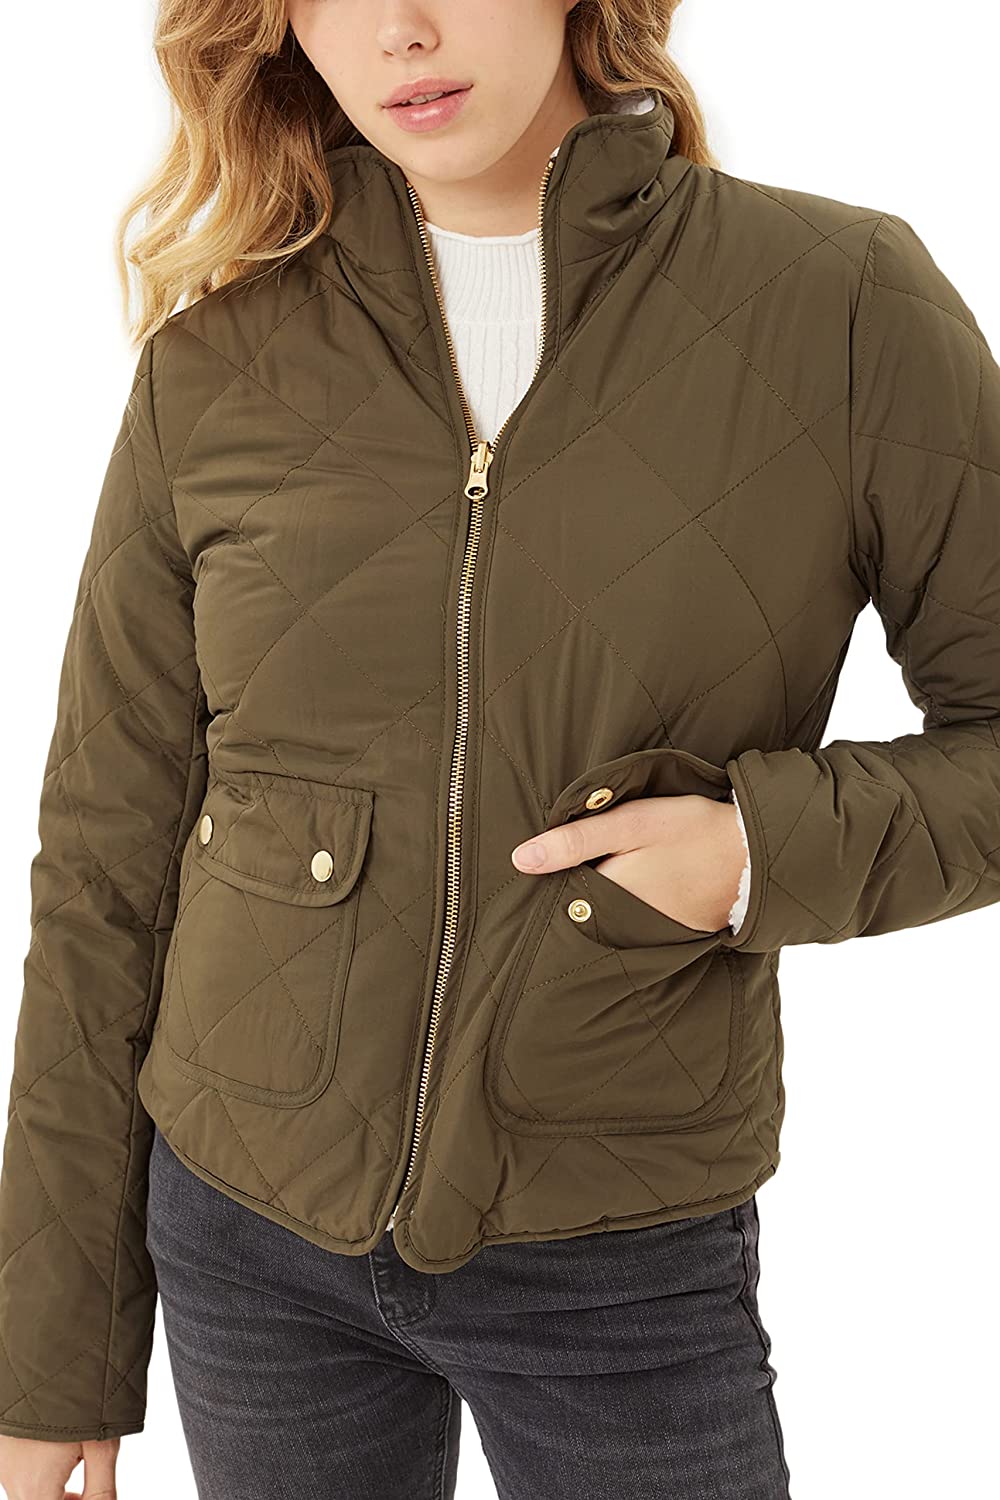 Reversible Sherpa Fleece Zip Up Jacket with Pockets FASHION BOOMY Womens Quilted Padding Vest